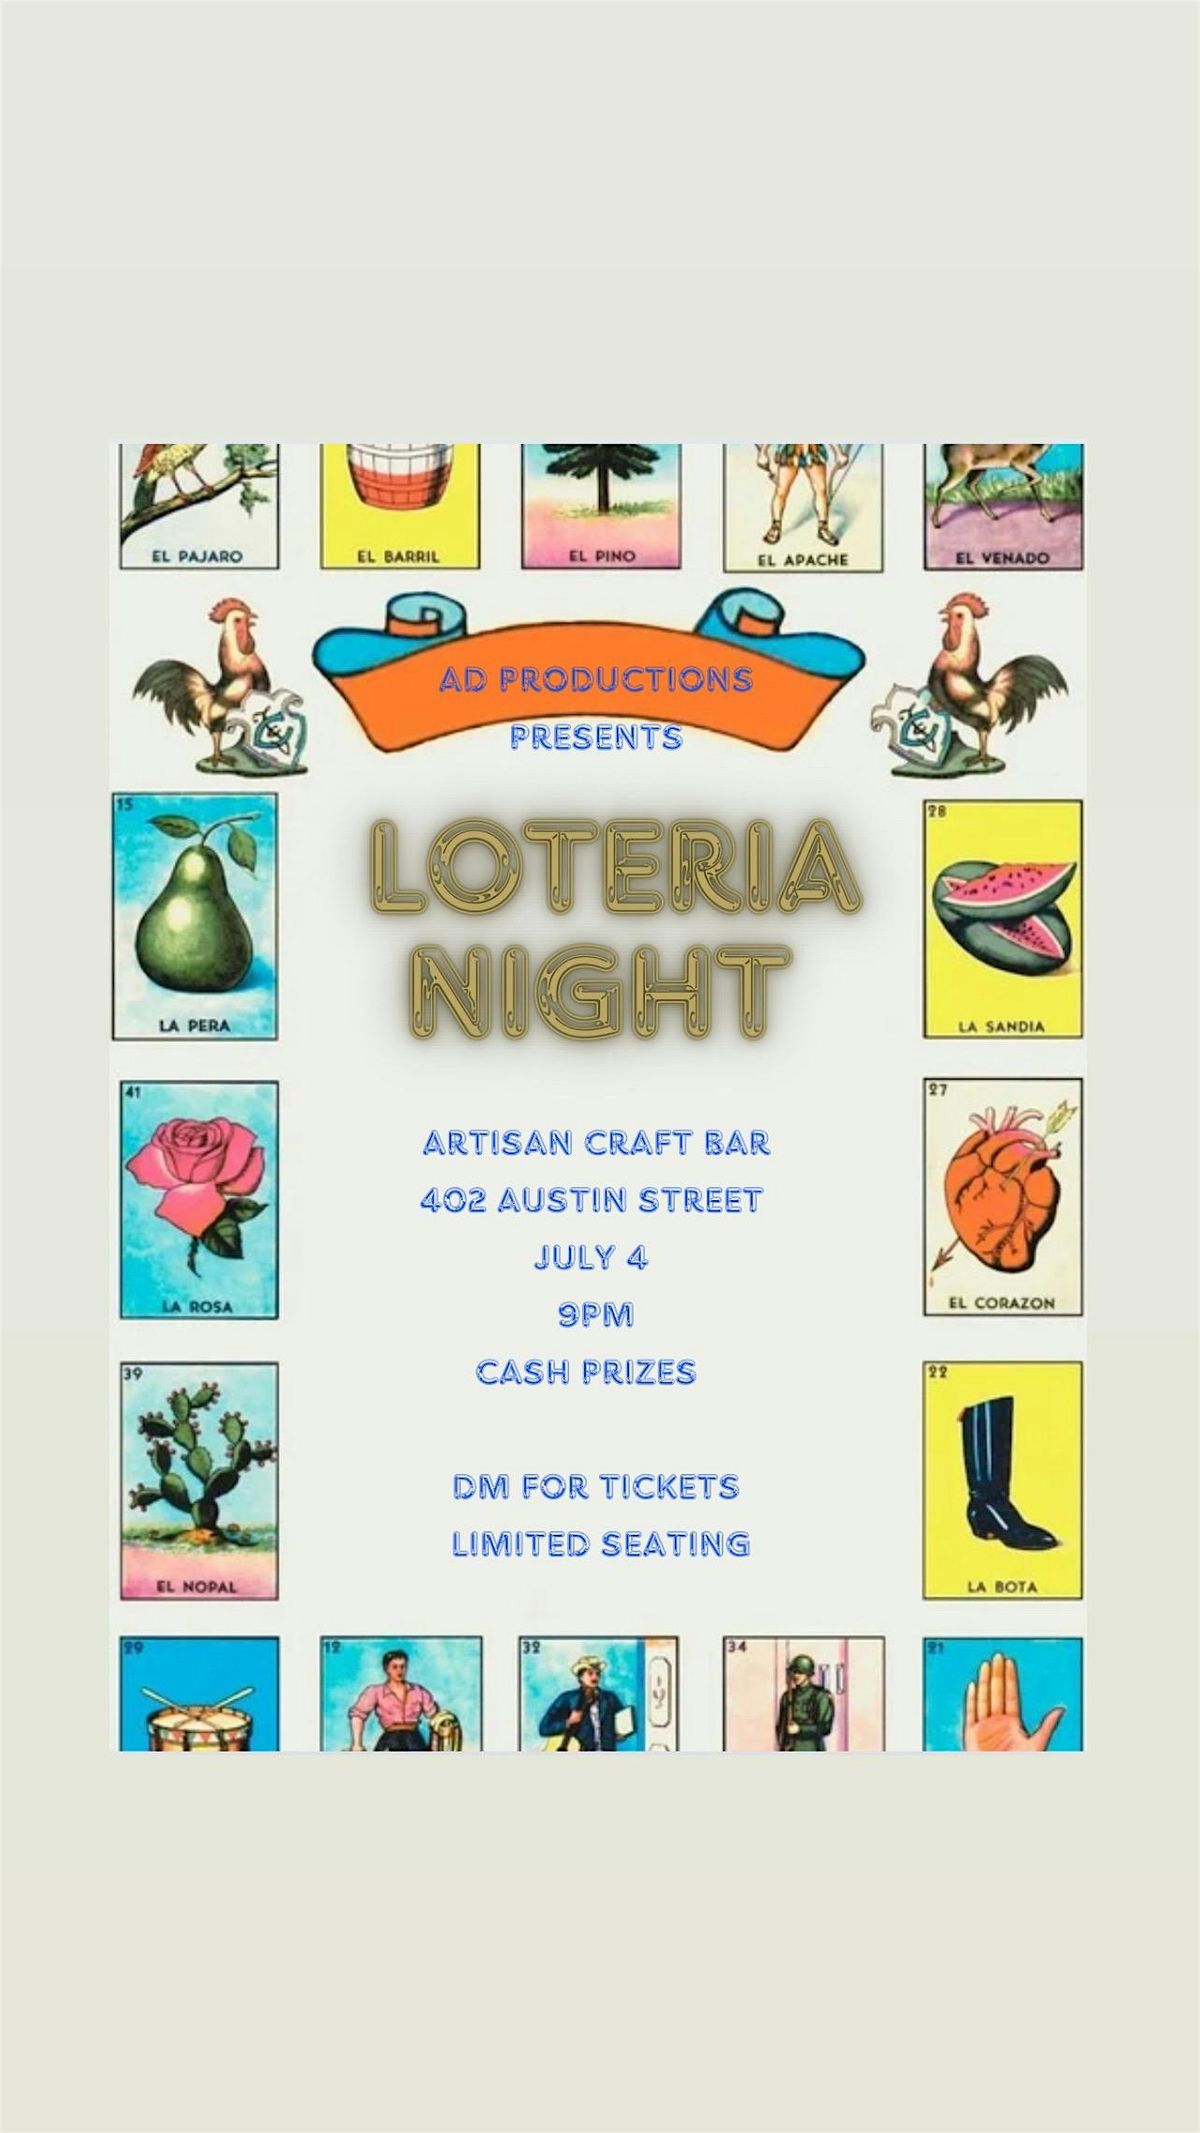 AD productions presents Loteria Drag Night